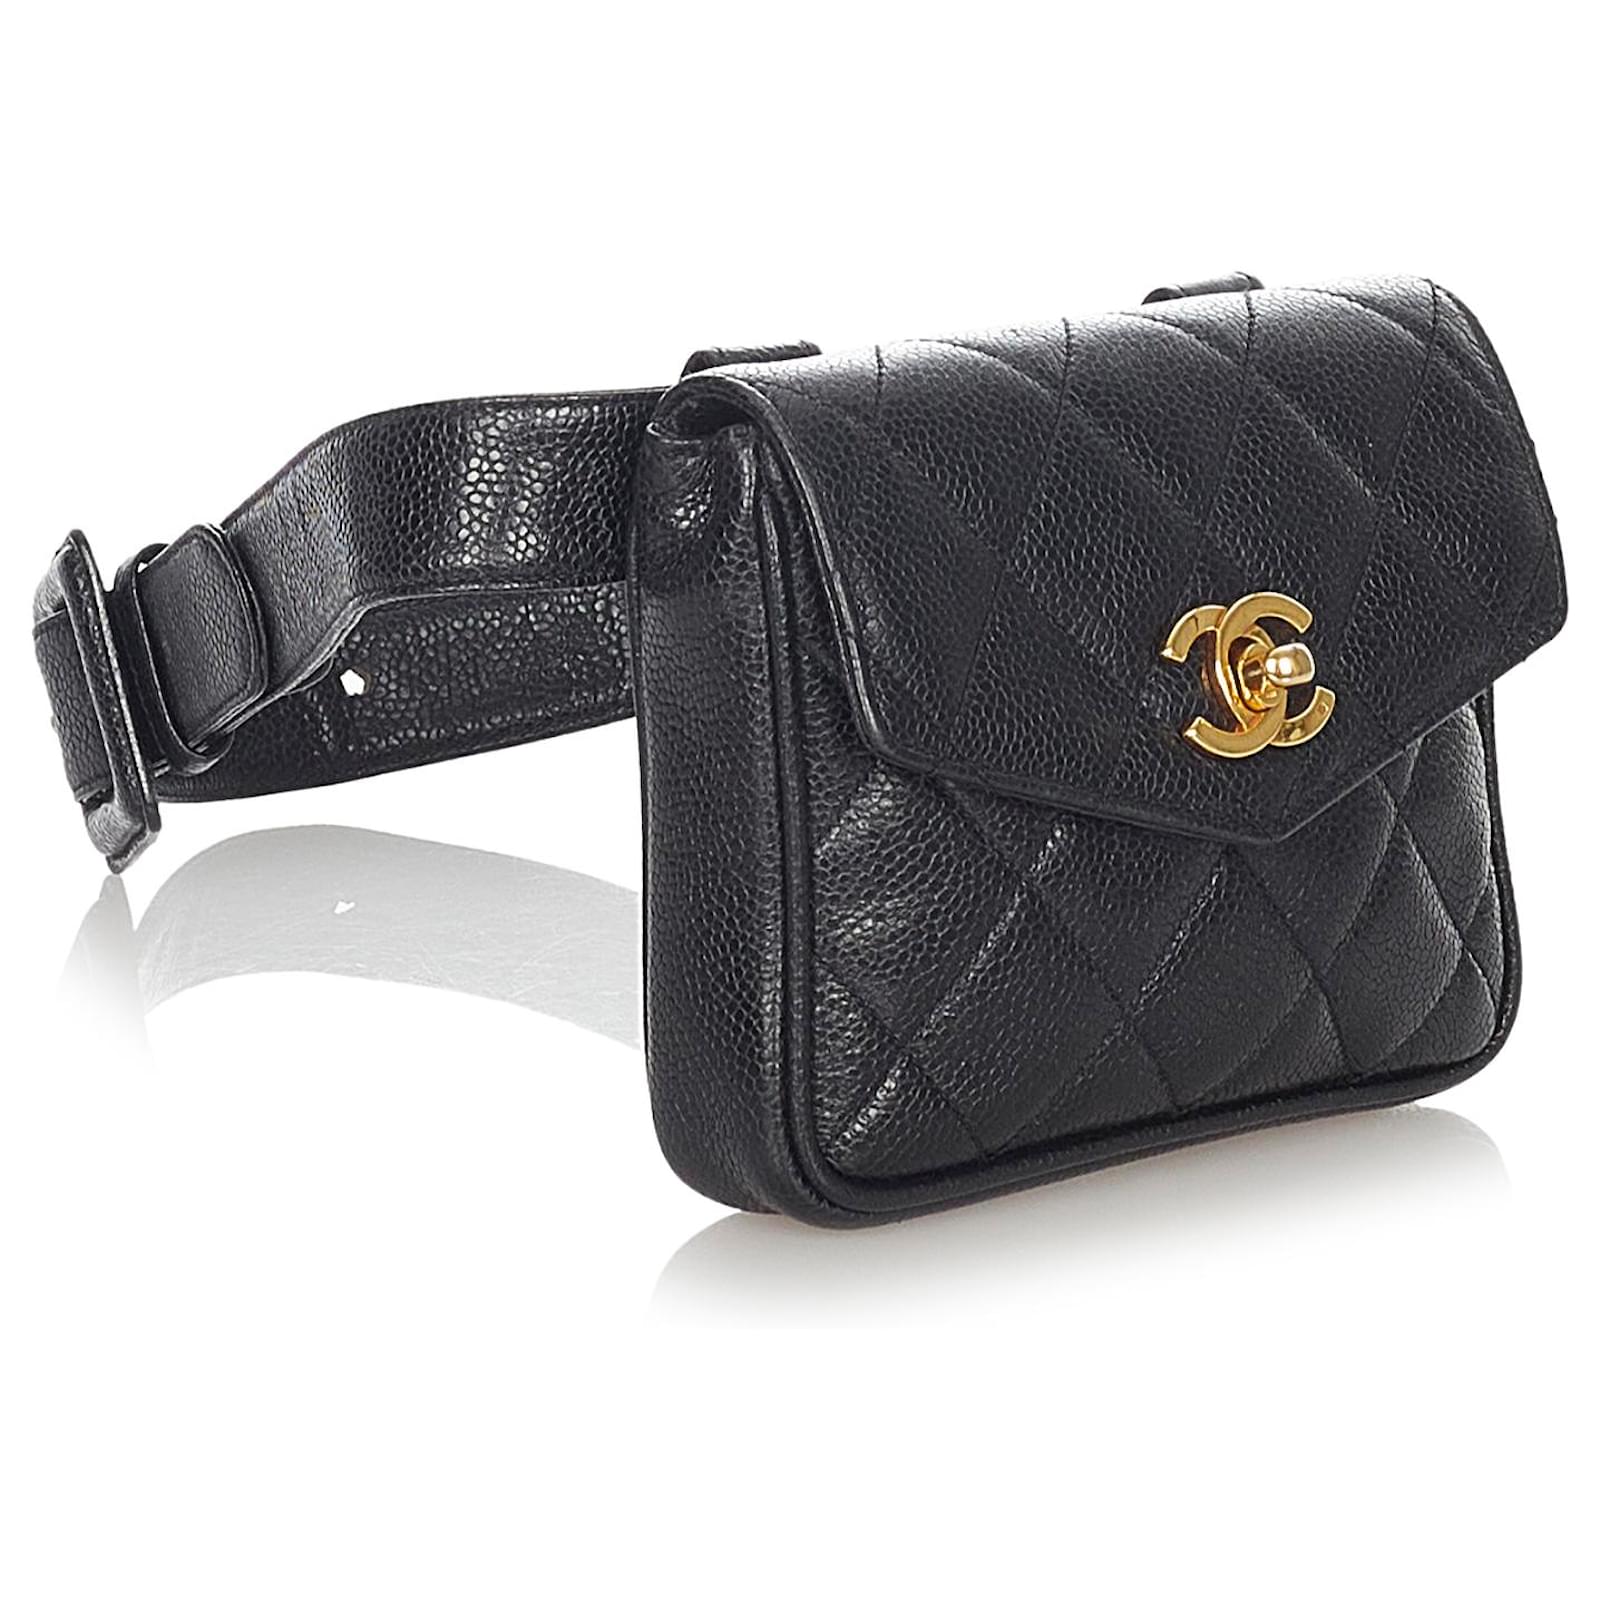 CHANEL Caviar Waist Bag in Black  More Than You Can Imagine